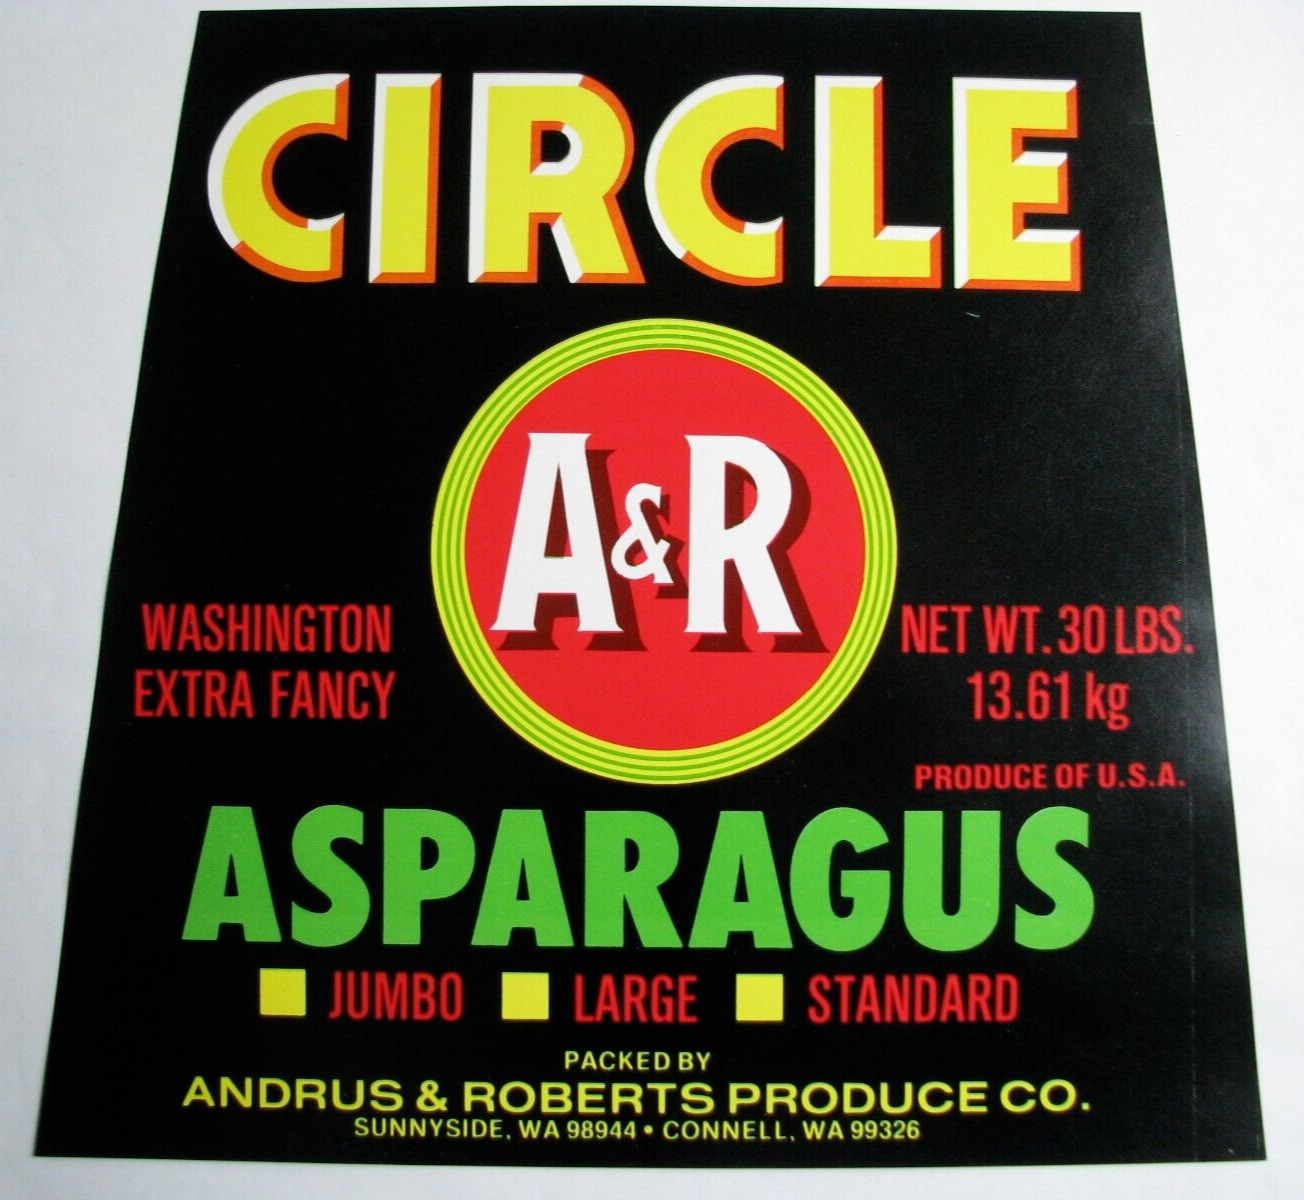 Original scarce CIRCLE A&R asparagus crate label Andrus Robert Sunnyside Connell